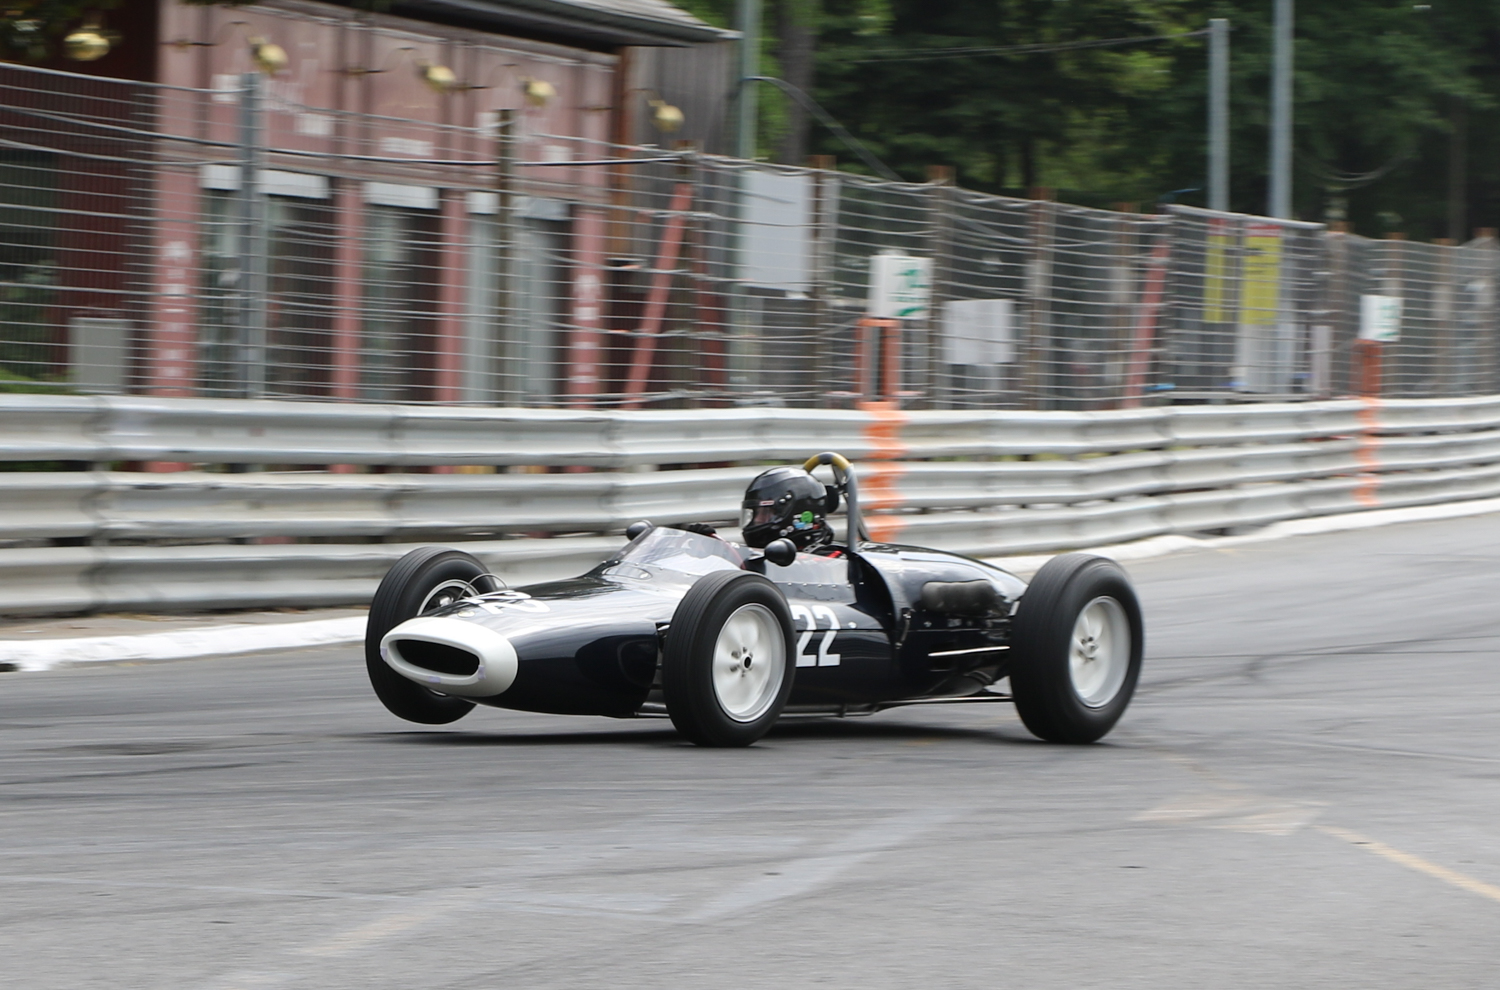 PETER HORSMAN LIFTS A FRONT WHEEL OF HIS LOTUS18-21 INTO STATION HAIRPIN. Picasa